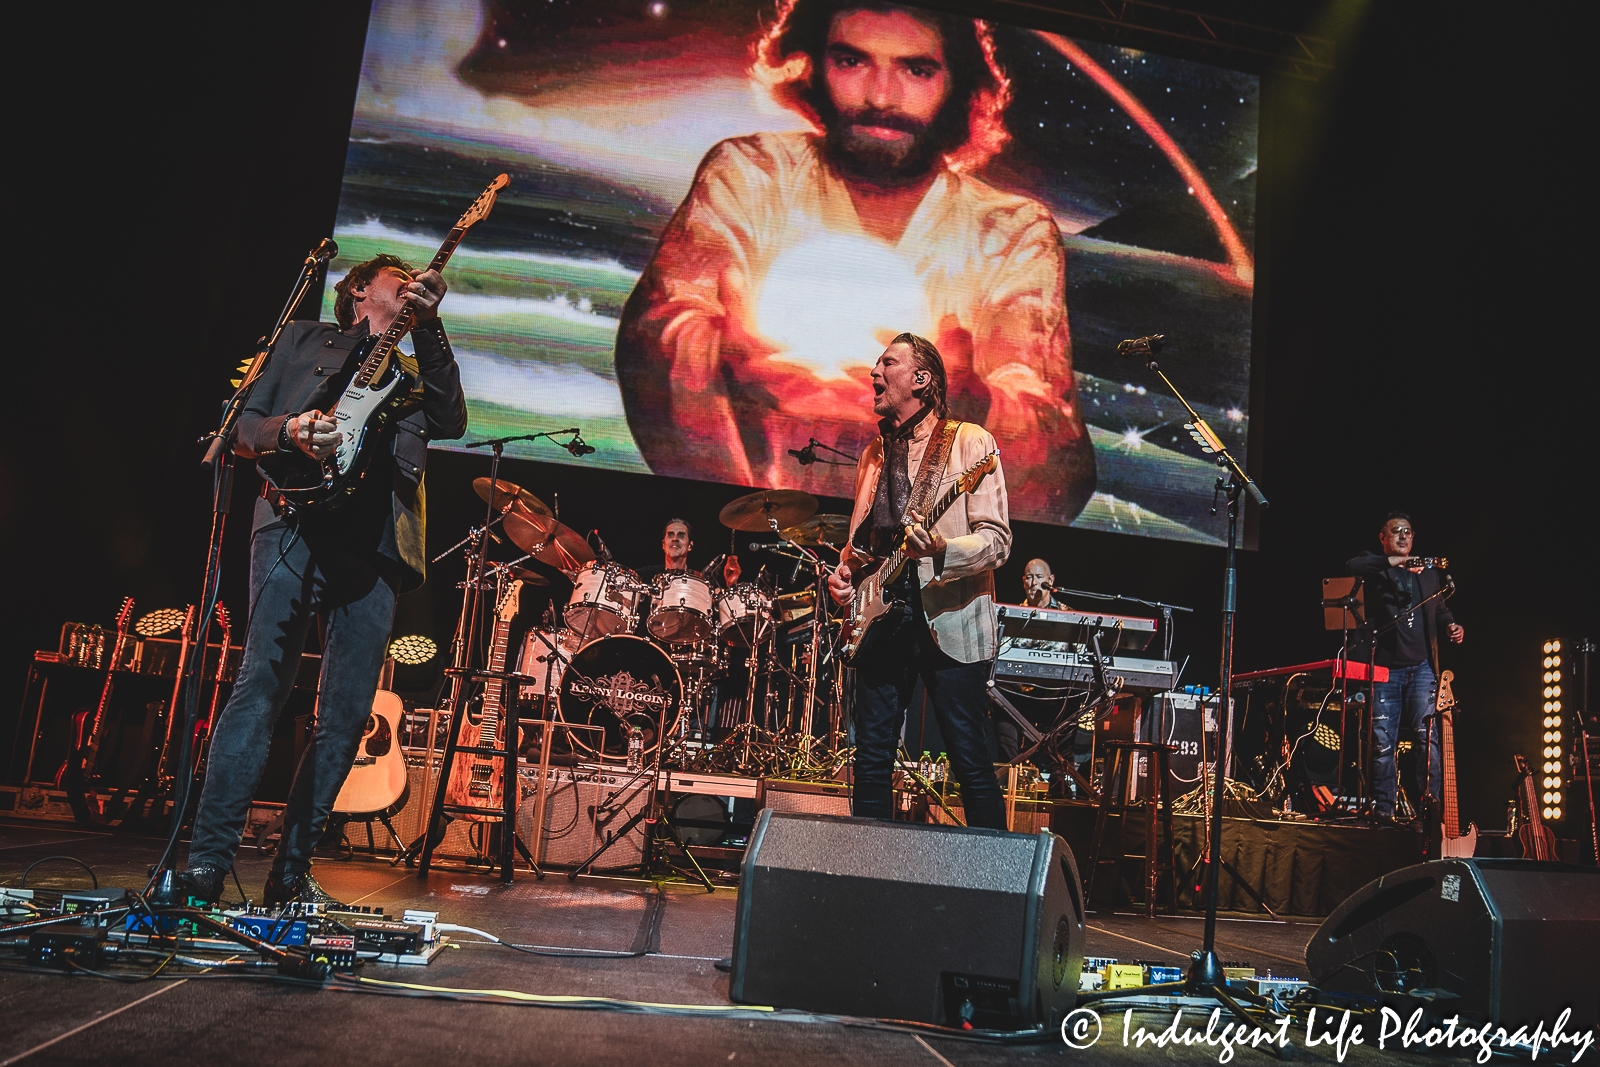 Kenny Loggins live in concert performing "Keep the Fire" at The Family Arena in St. Charles, MO during his "This Is It!" farewell tour stop on August 17, 2023.